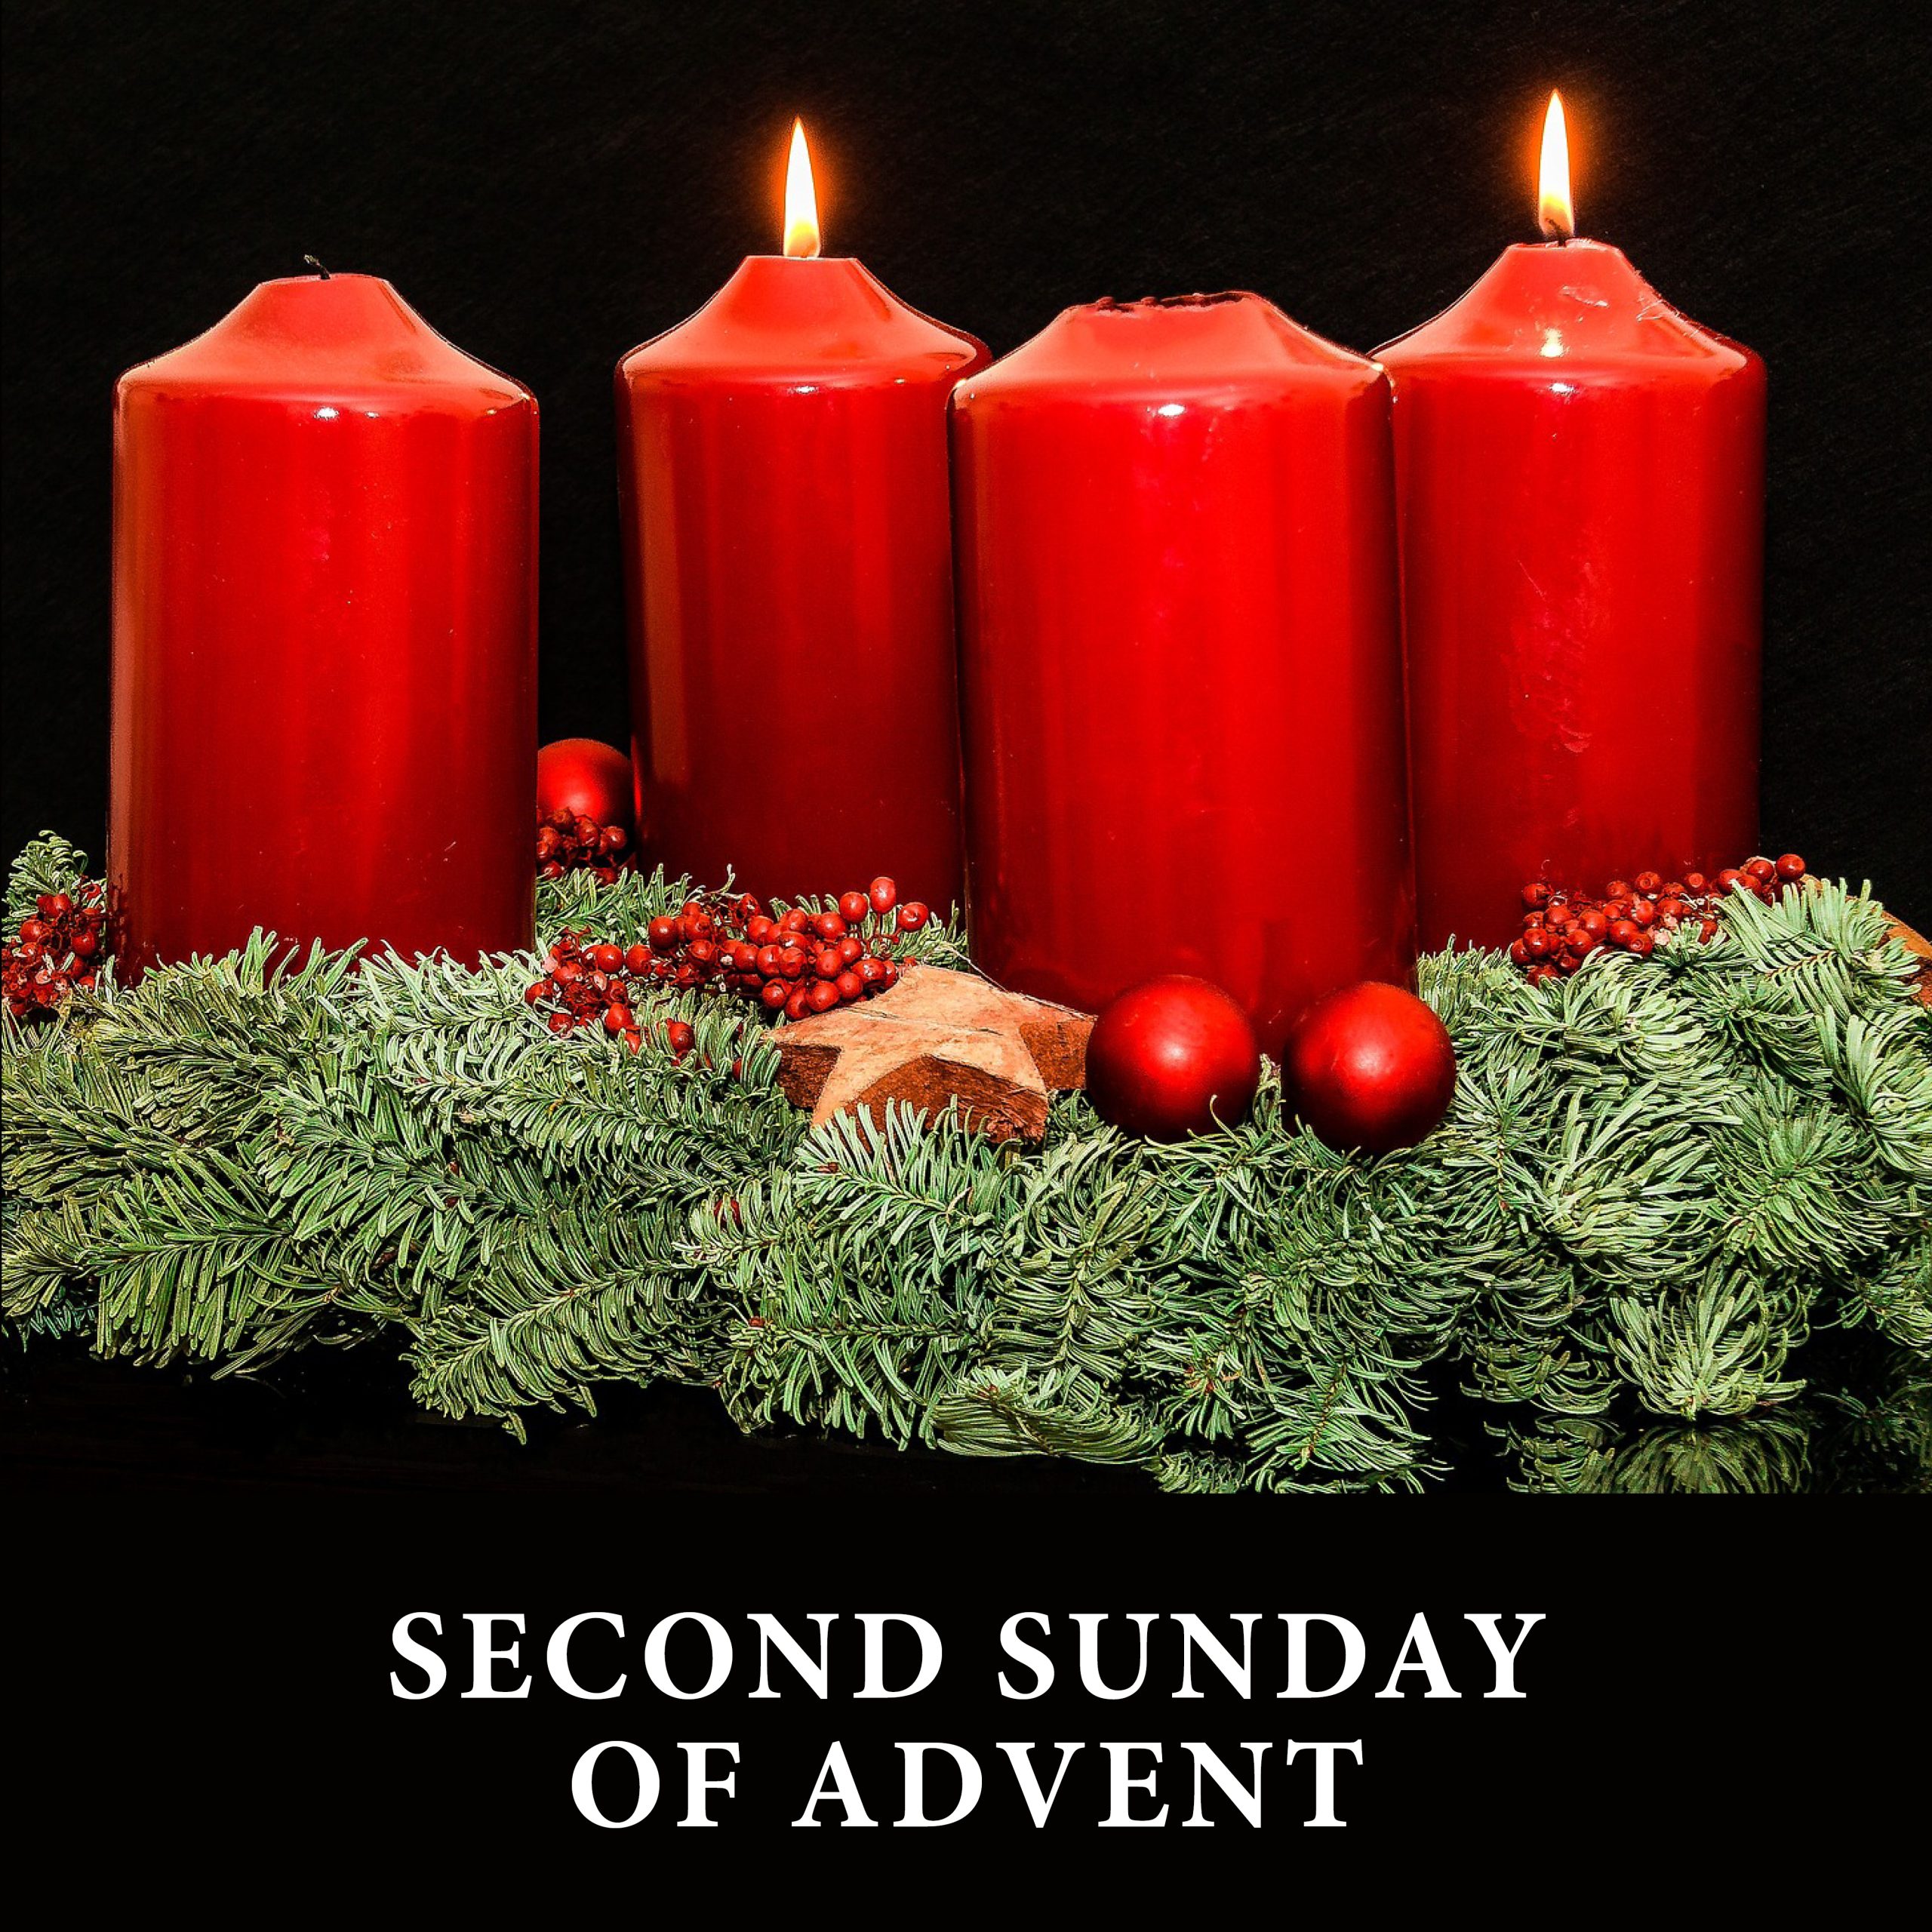 Our Lady of the Wayside Catholic Church Second Sunday of Advent